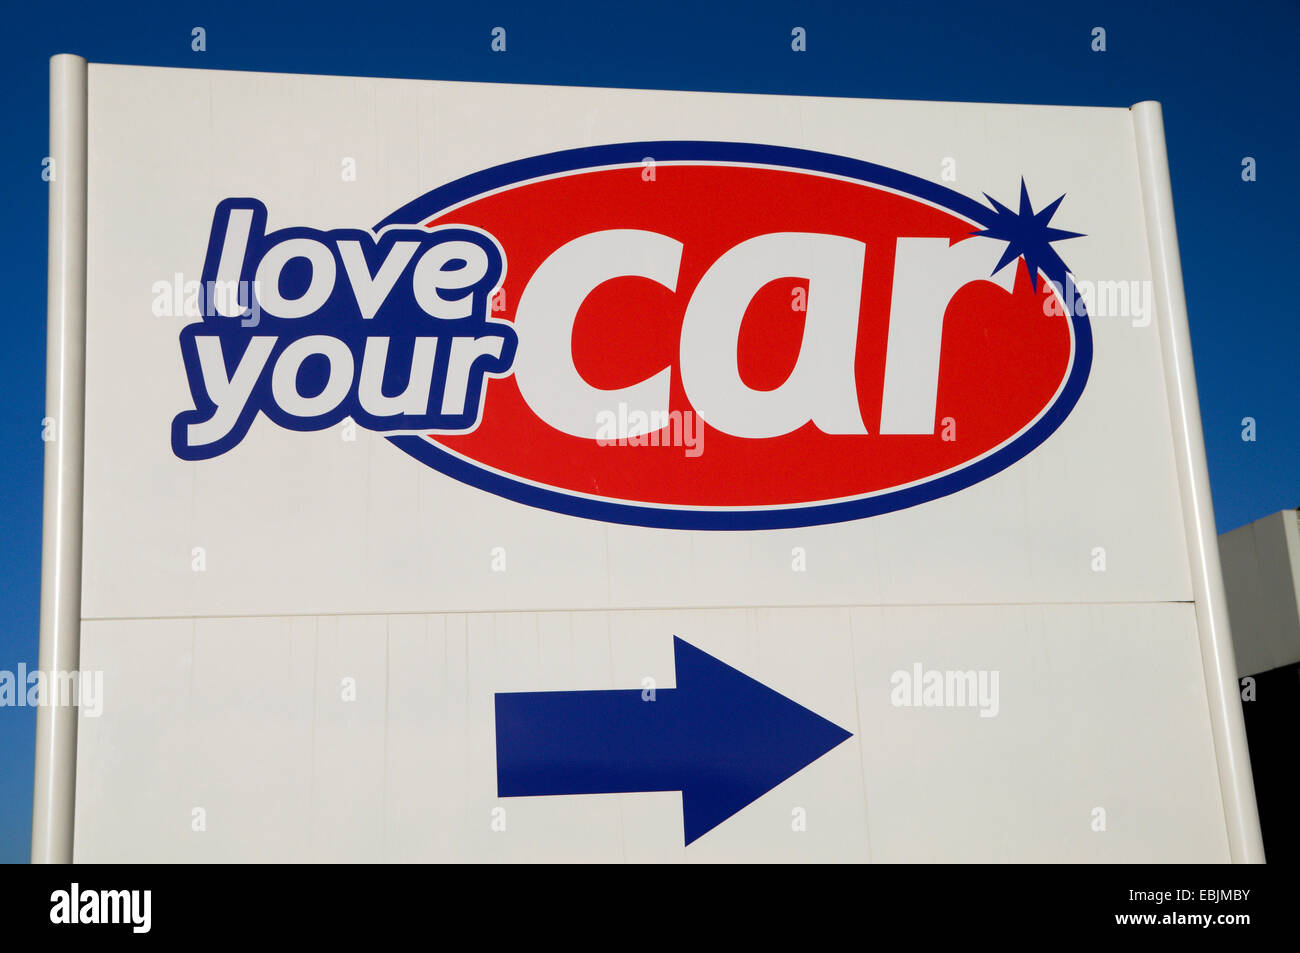 Love Your Car repair company sign, Cardiff, Wales, UK. Stock Photo